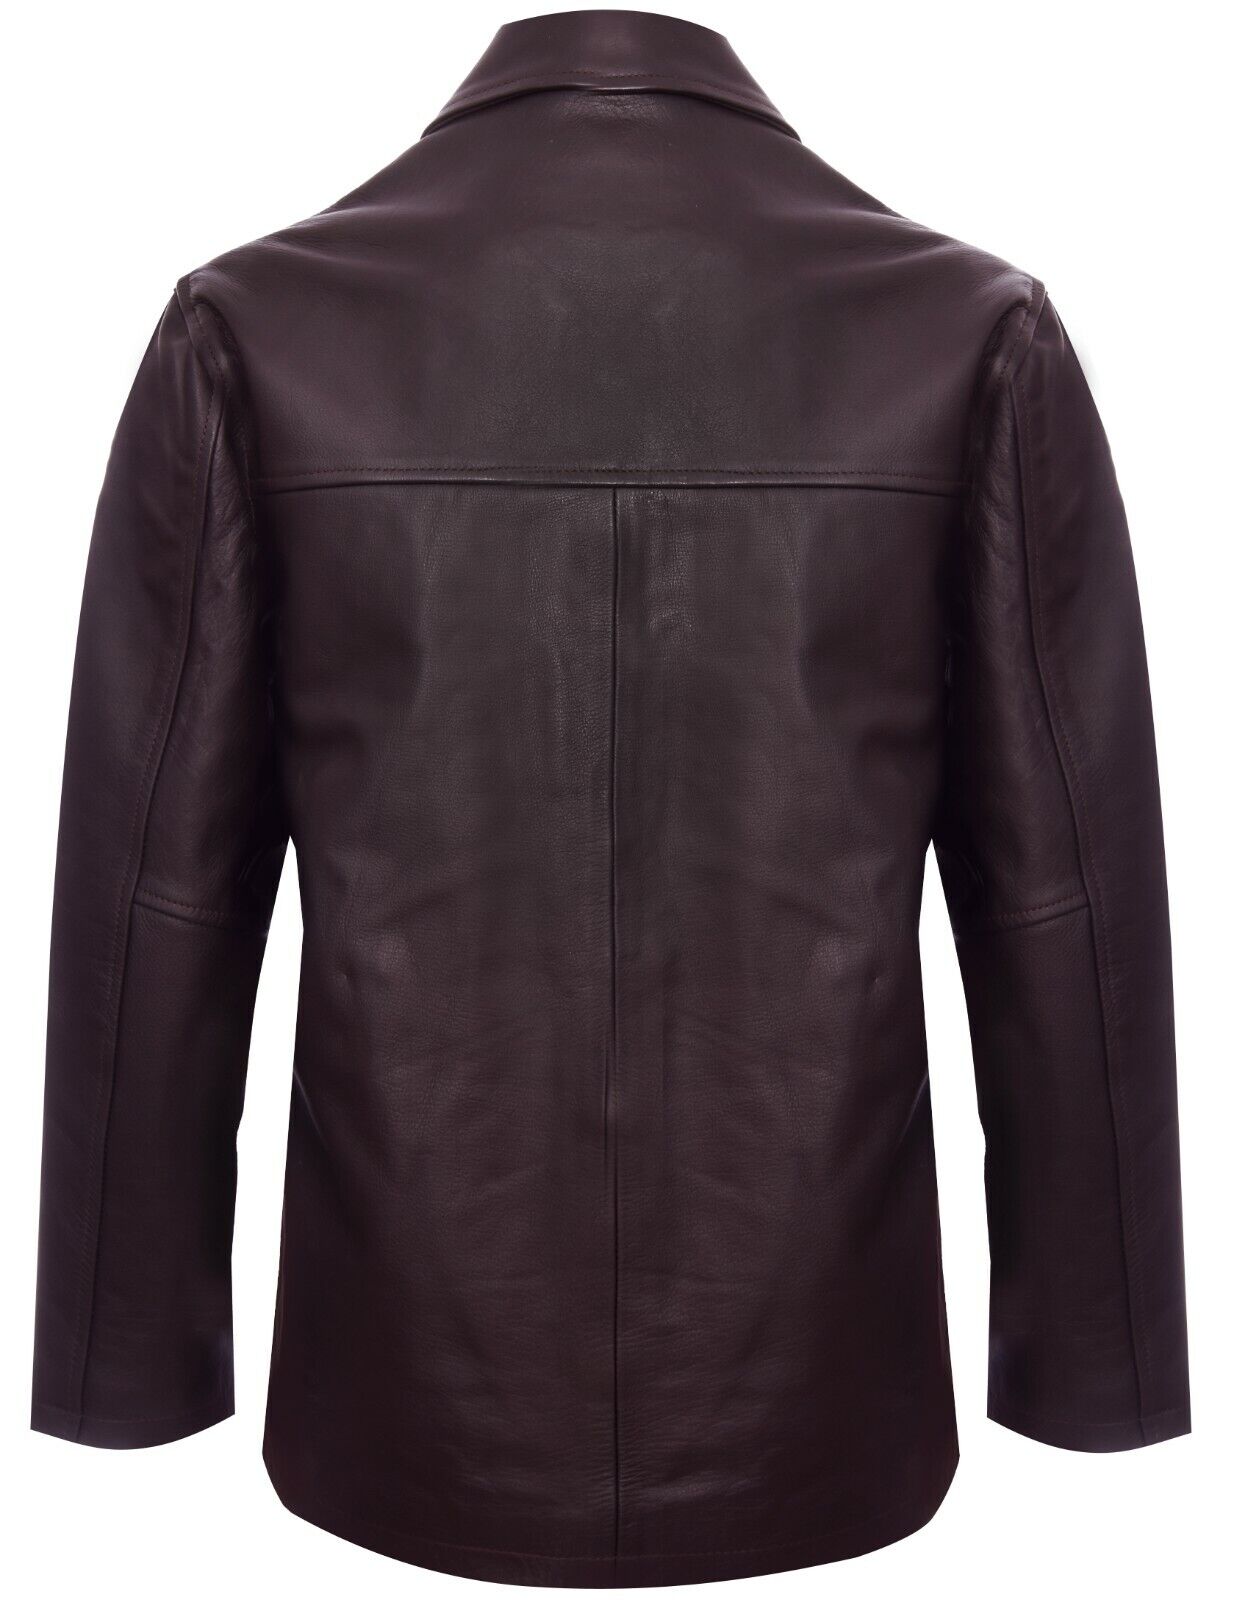 Mens Classic Cowhide Leather Box Jacket